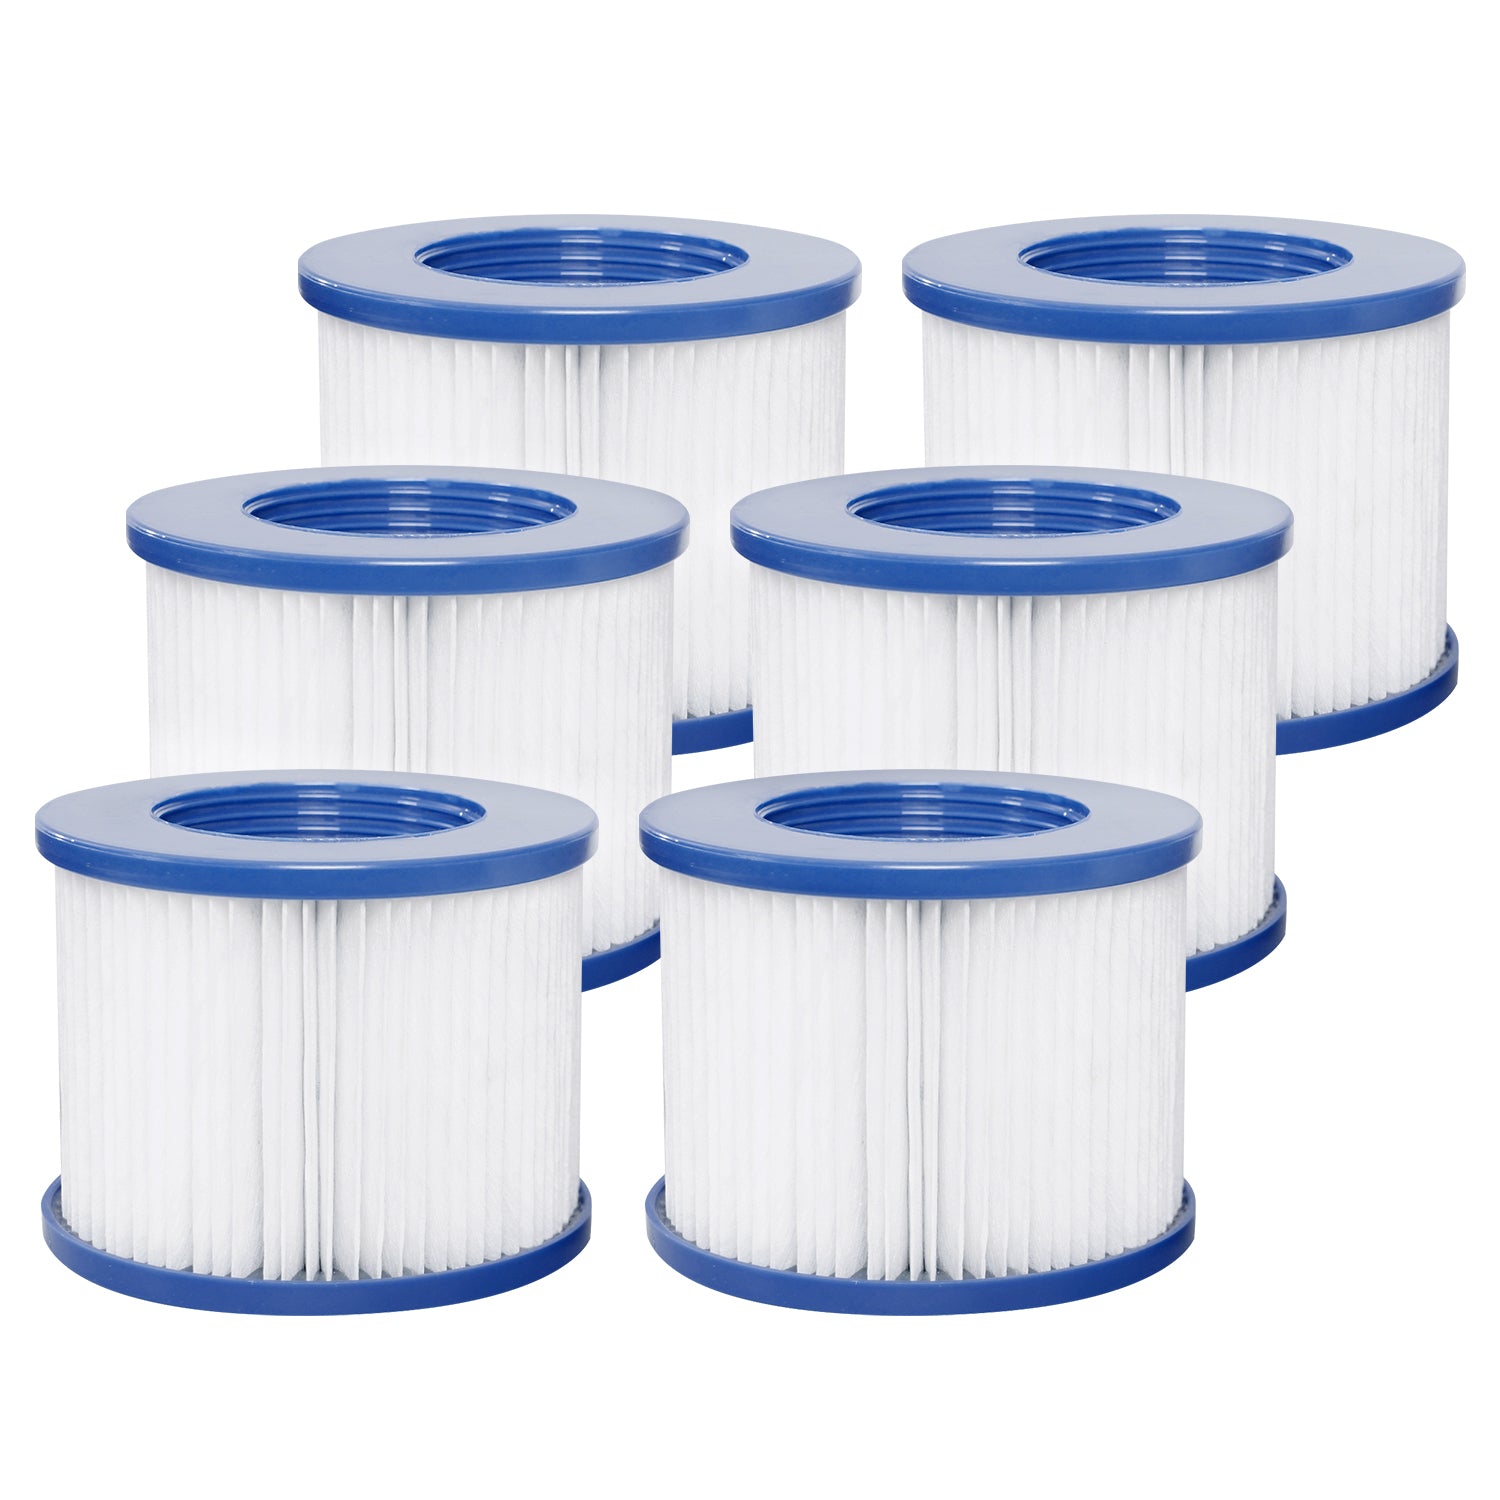 Relxtime 6 Pack Spa Filter Replacement, Pool Filters Hot Tub Filter Cartridges, Compatible With Inflatable Tubs Filtration, Blue